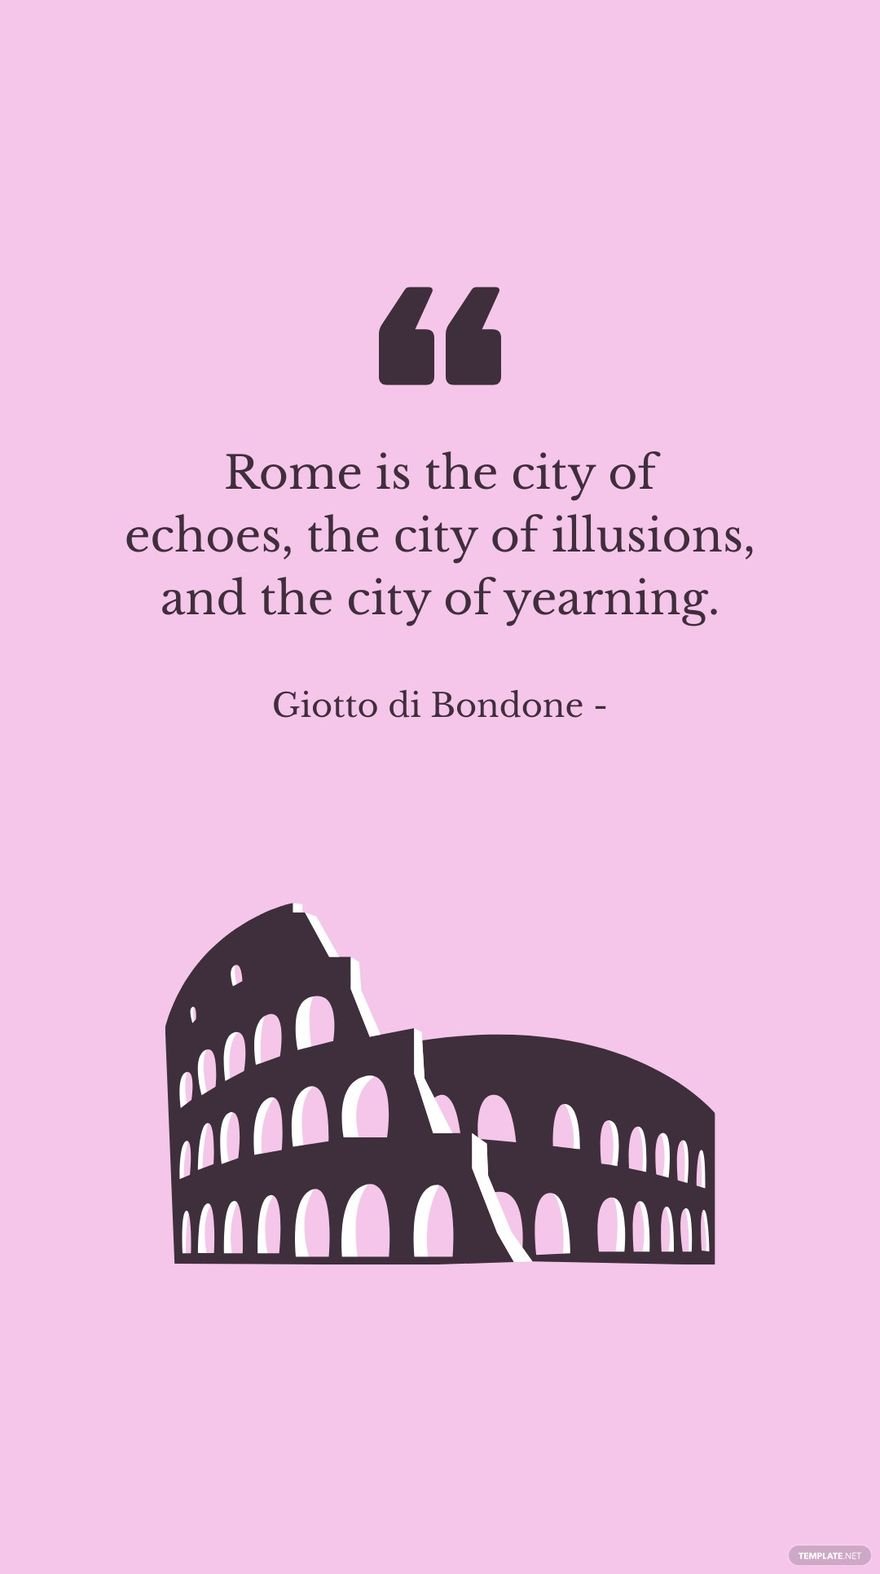 Giotto di Bondone - Rome is the city of echoes, the city of illusions, and the city of yearning.